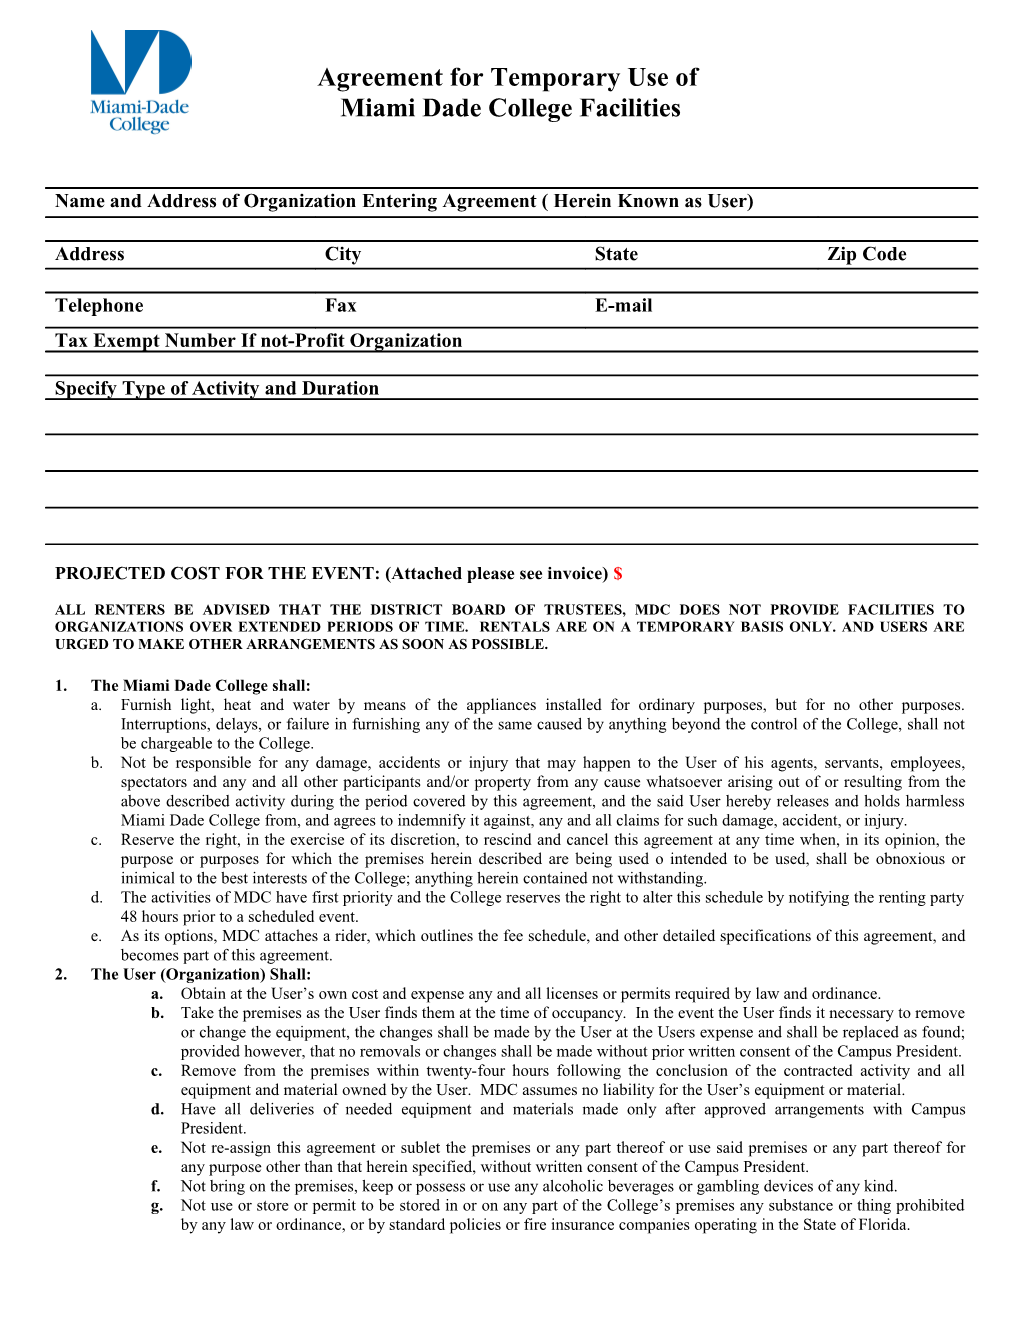 Agreement for Temporary Use Of